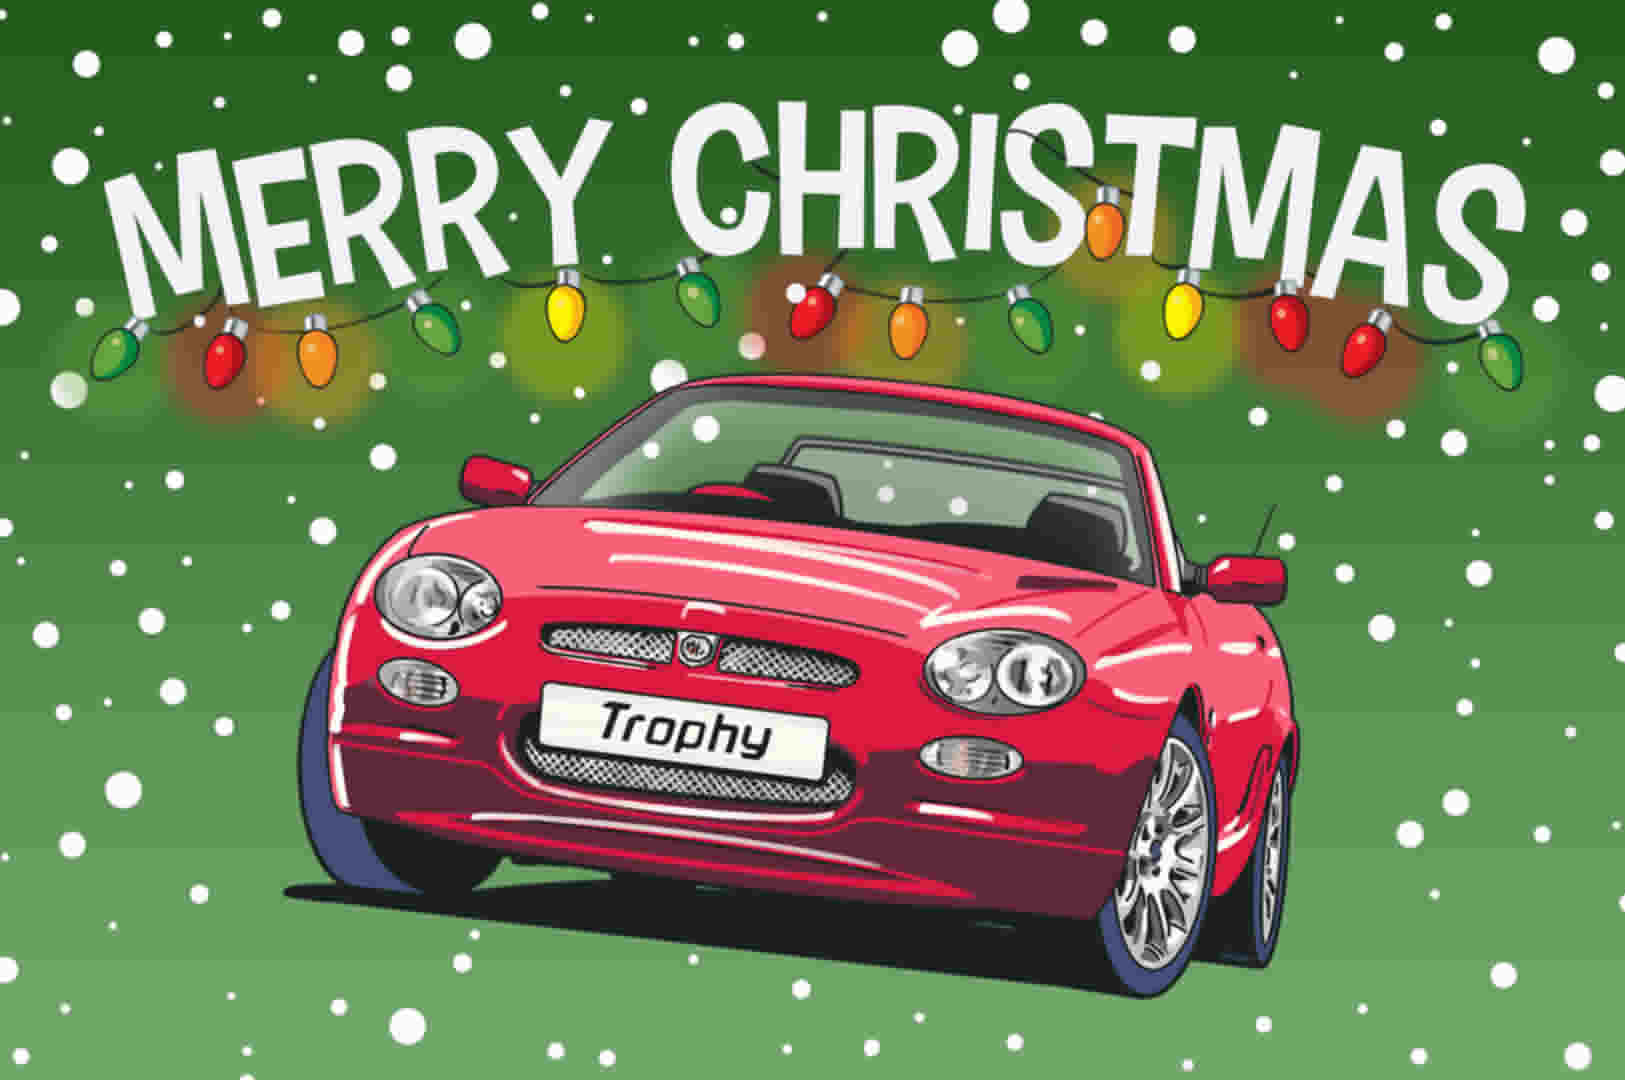 MGF Trophy in Red Christmas Card